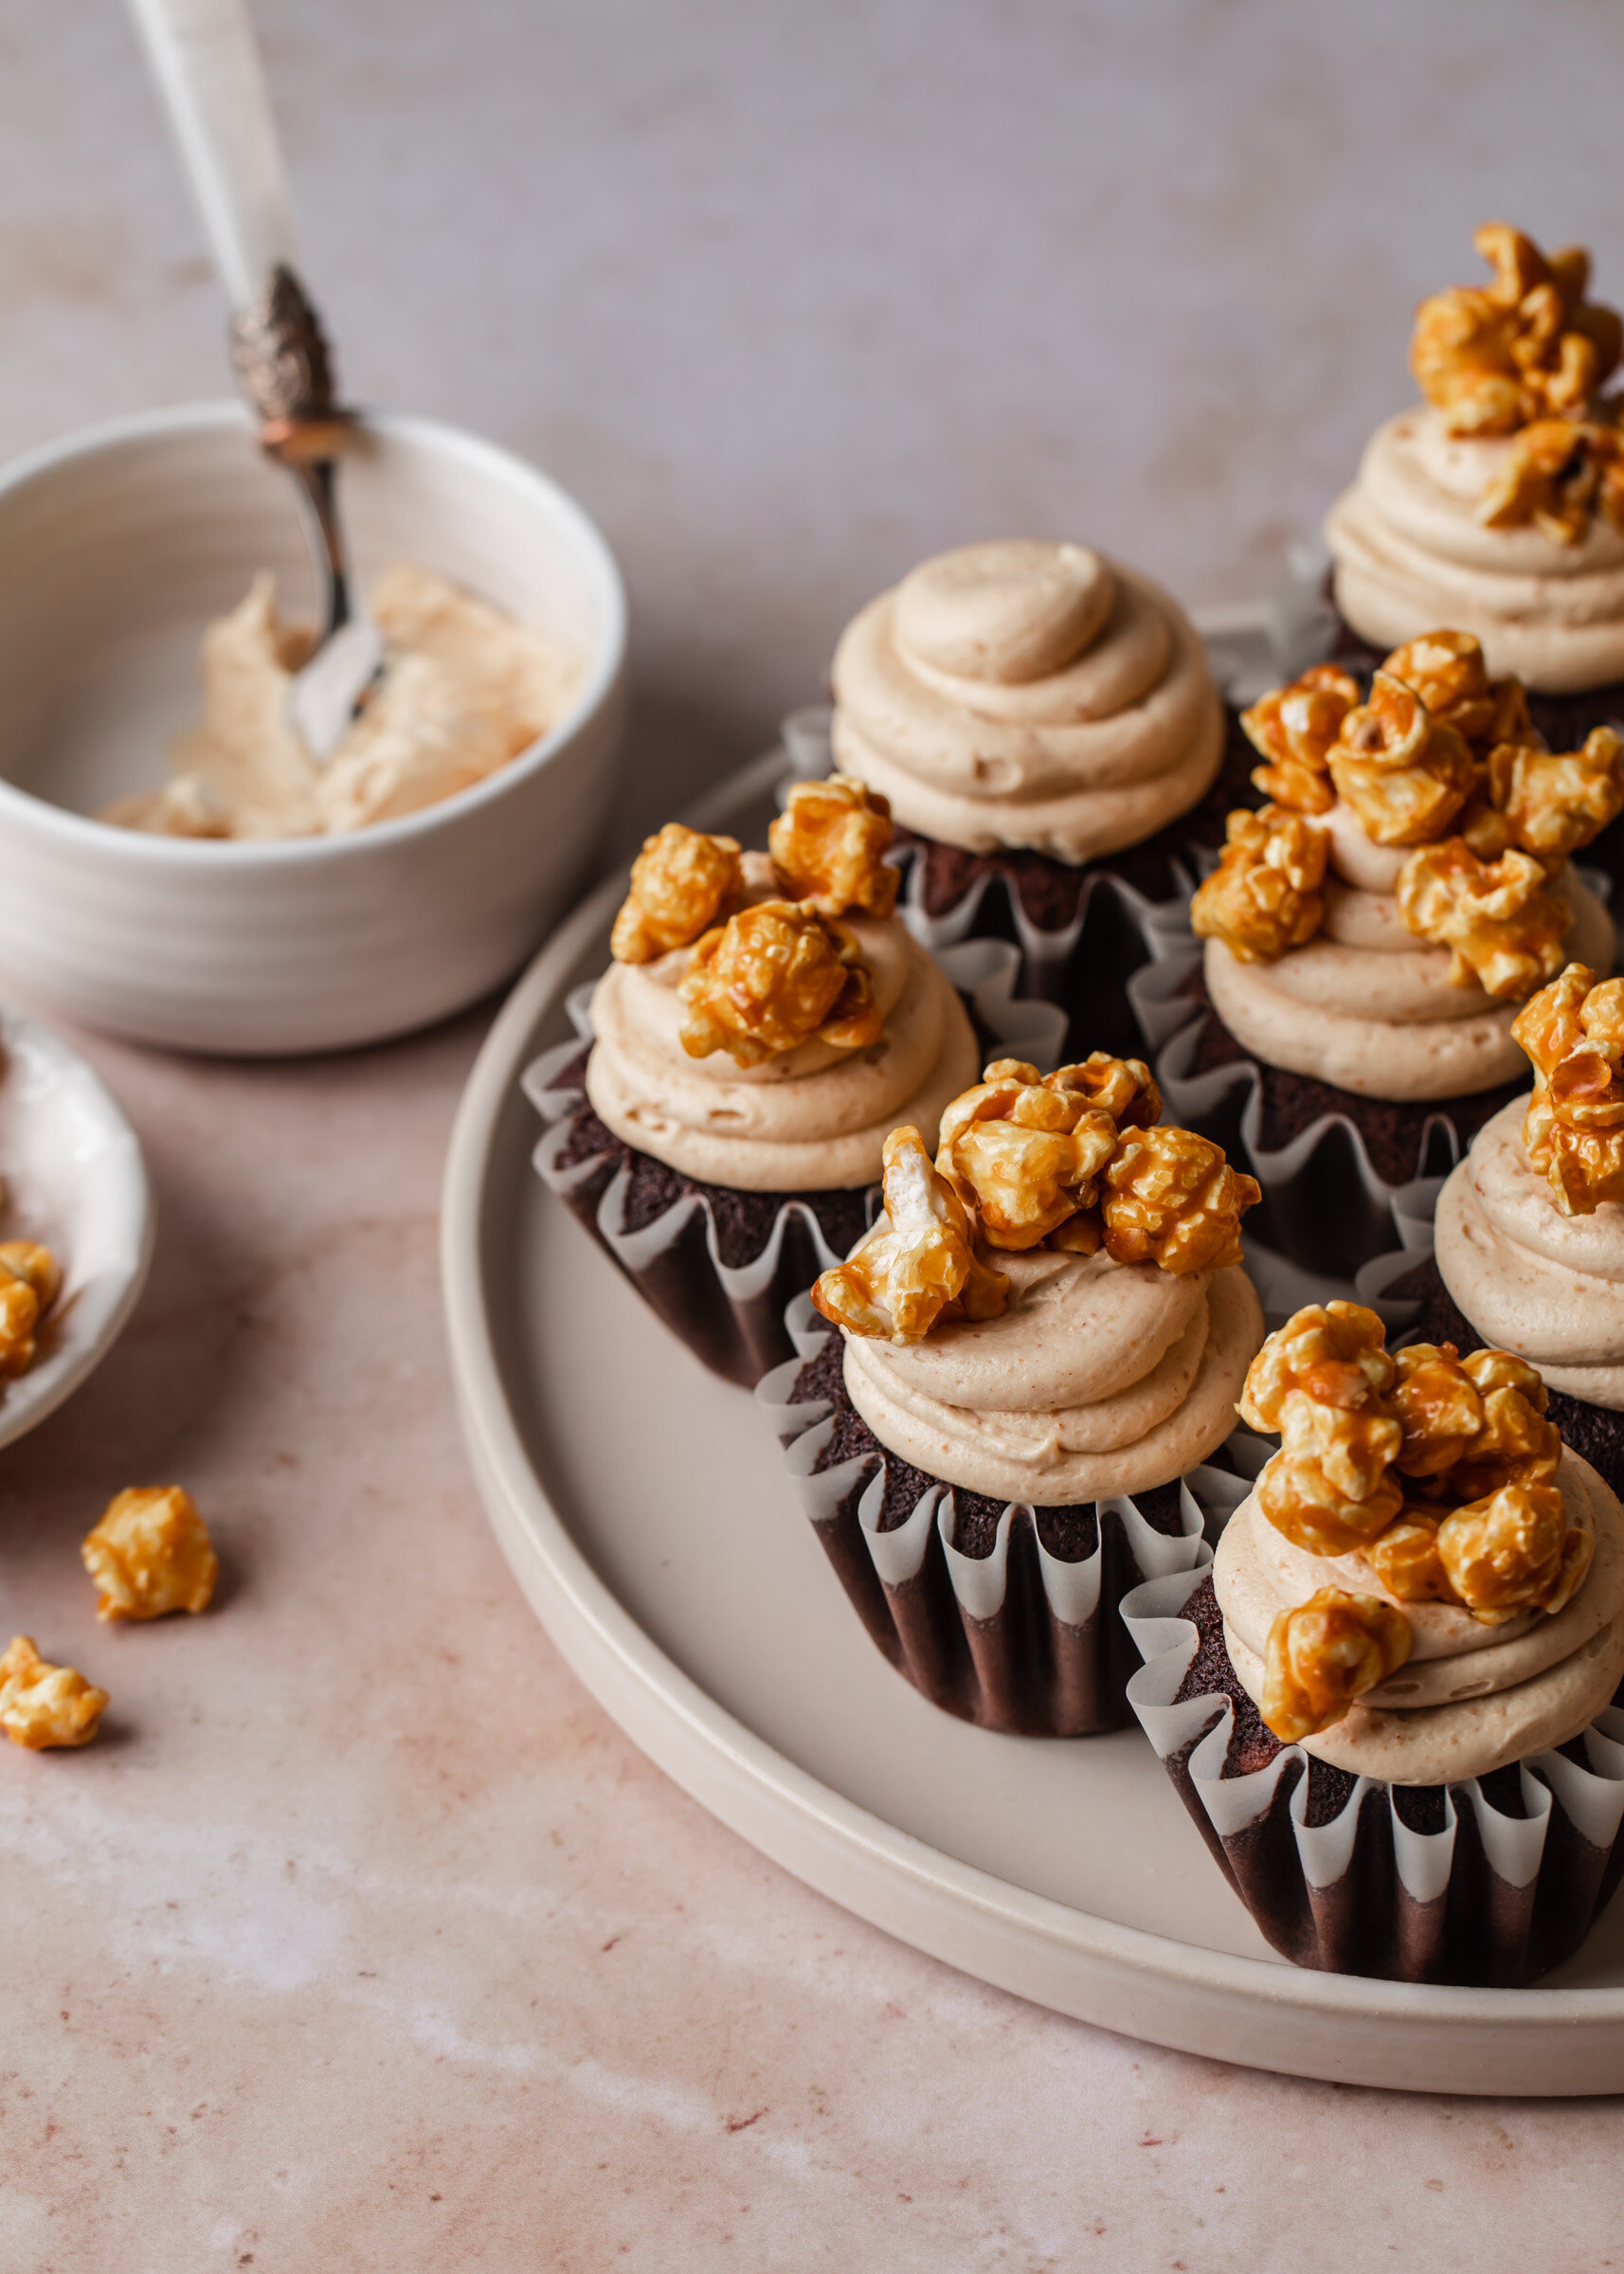 Chocolate cupcakes with peanut butter frosting and caramel corn on top.